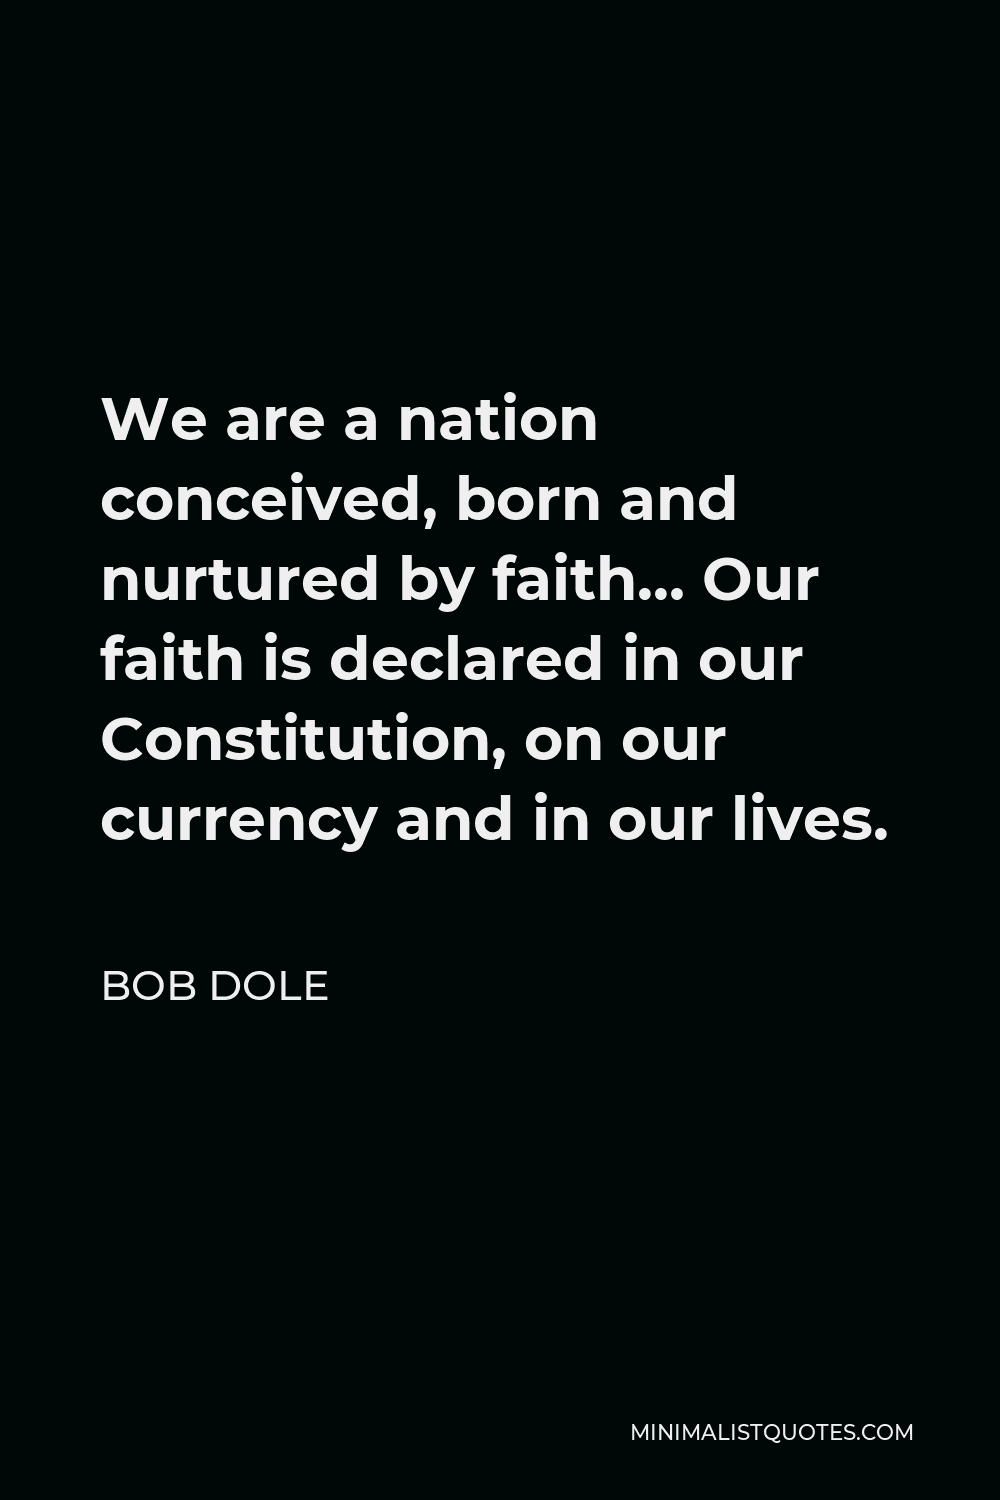 Bob Dole Quote - We are a nation conceived, born and nurtured by faith… Our faith is declared in our Constitution, on our currency and in our lives.